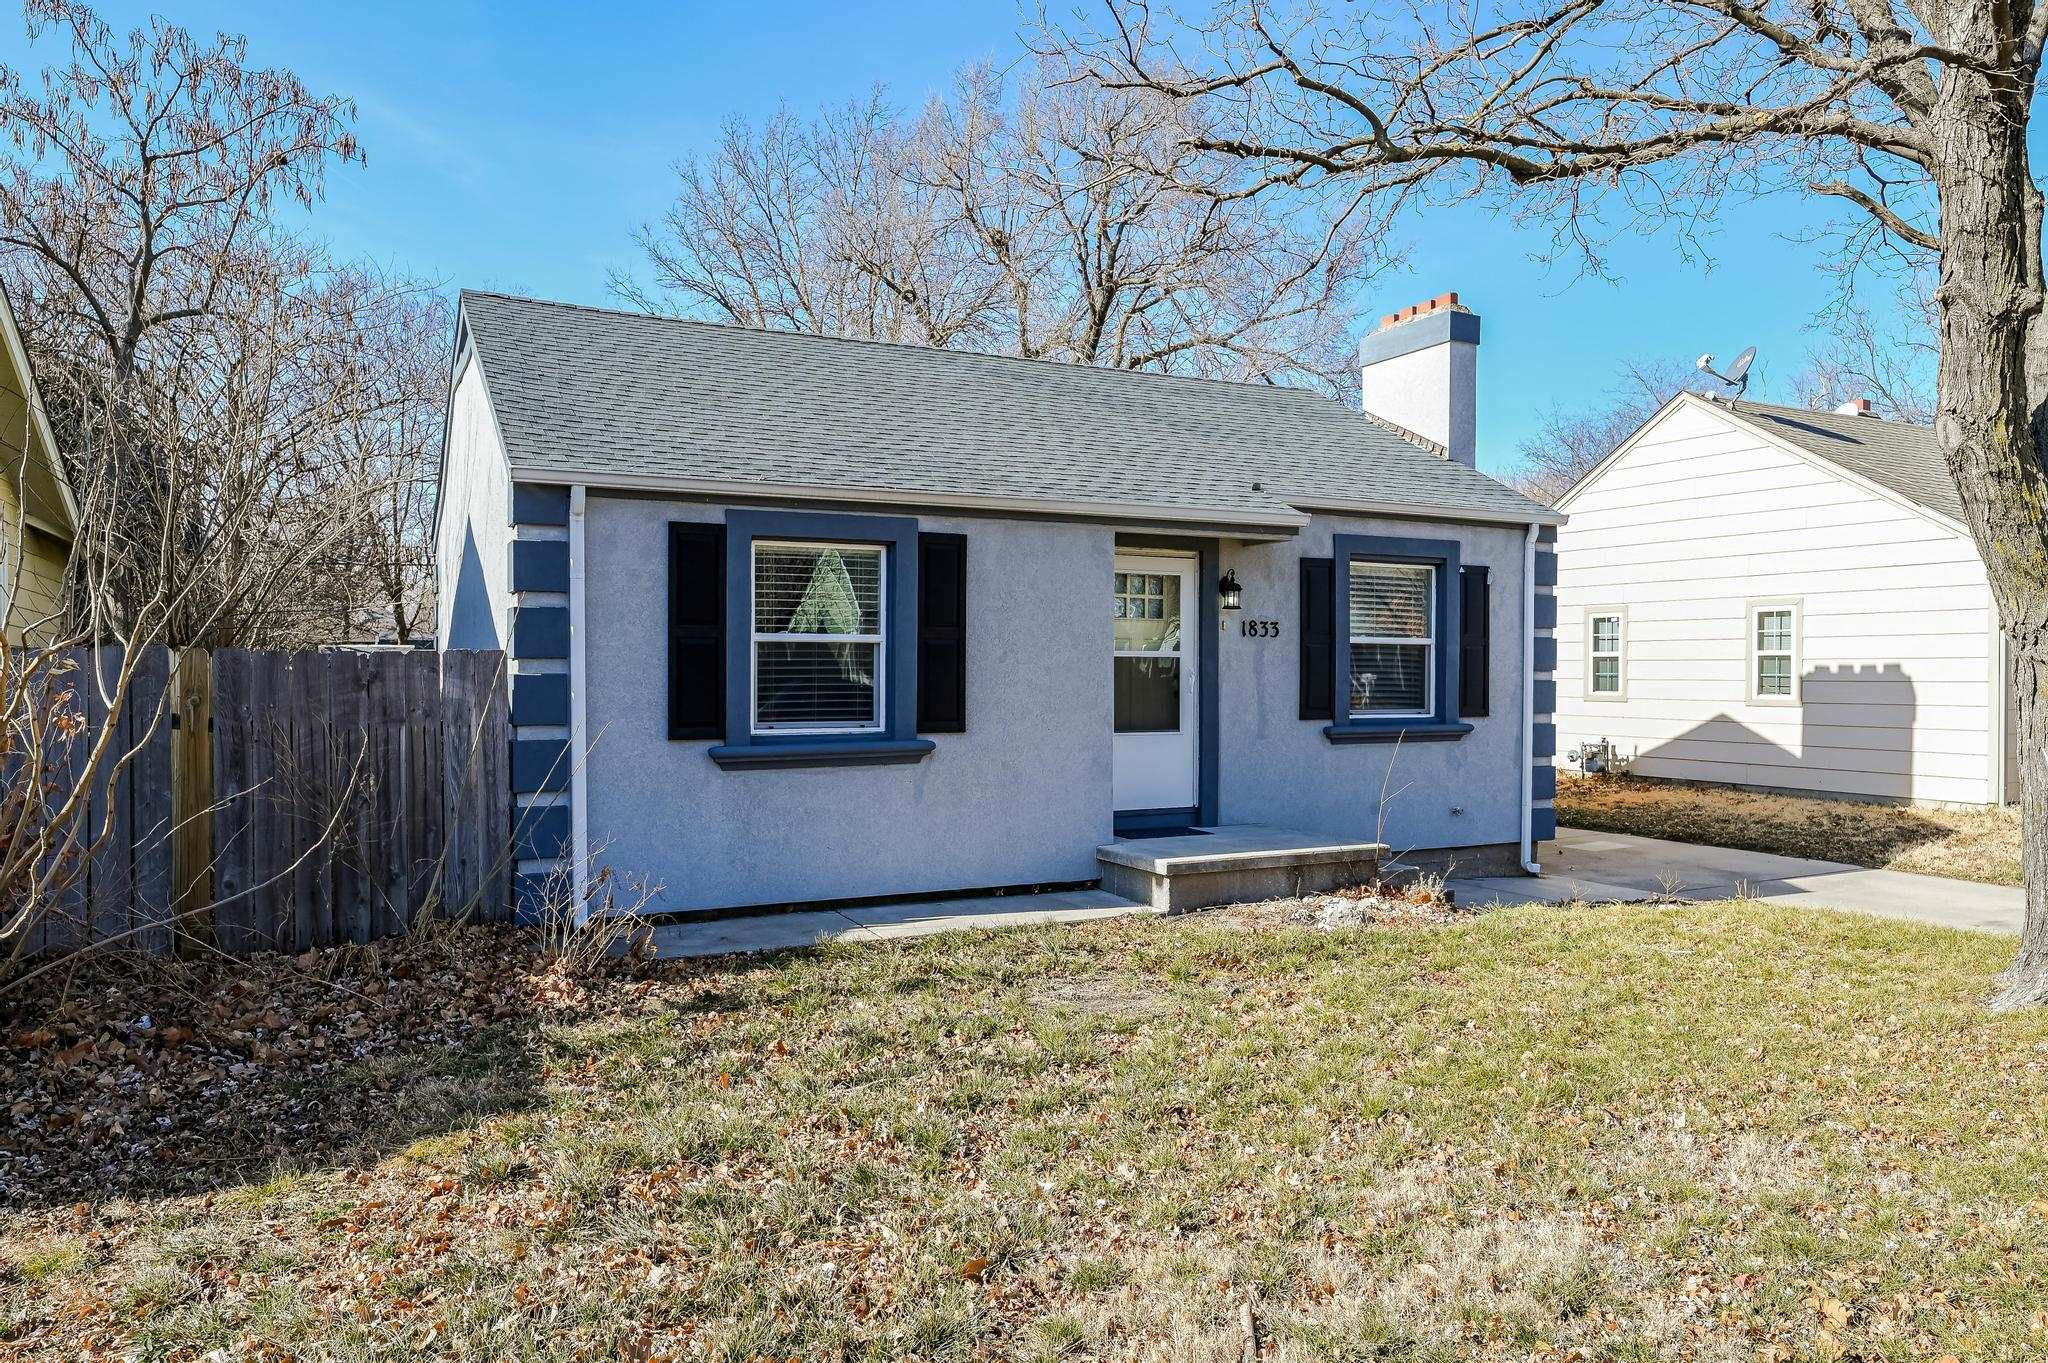 Must See Home!! Like new inside! Completely updated Updated kitchen, and bath. Appliances were new in 2019. Plumbing, HVAC, Lighting, Doors, Roof and roof deking, windows, guttering, ceiling fans, hot water tank all new in 2019. Fenced Back yard!! Perfect starter home or rental property